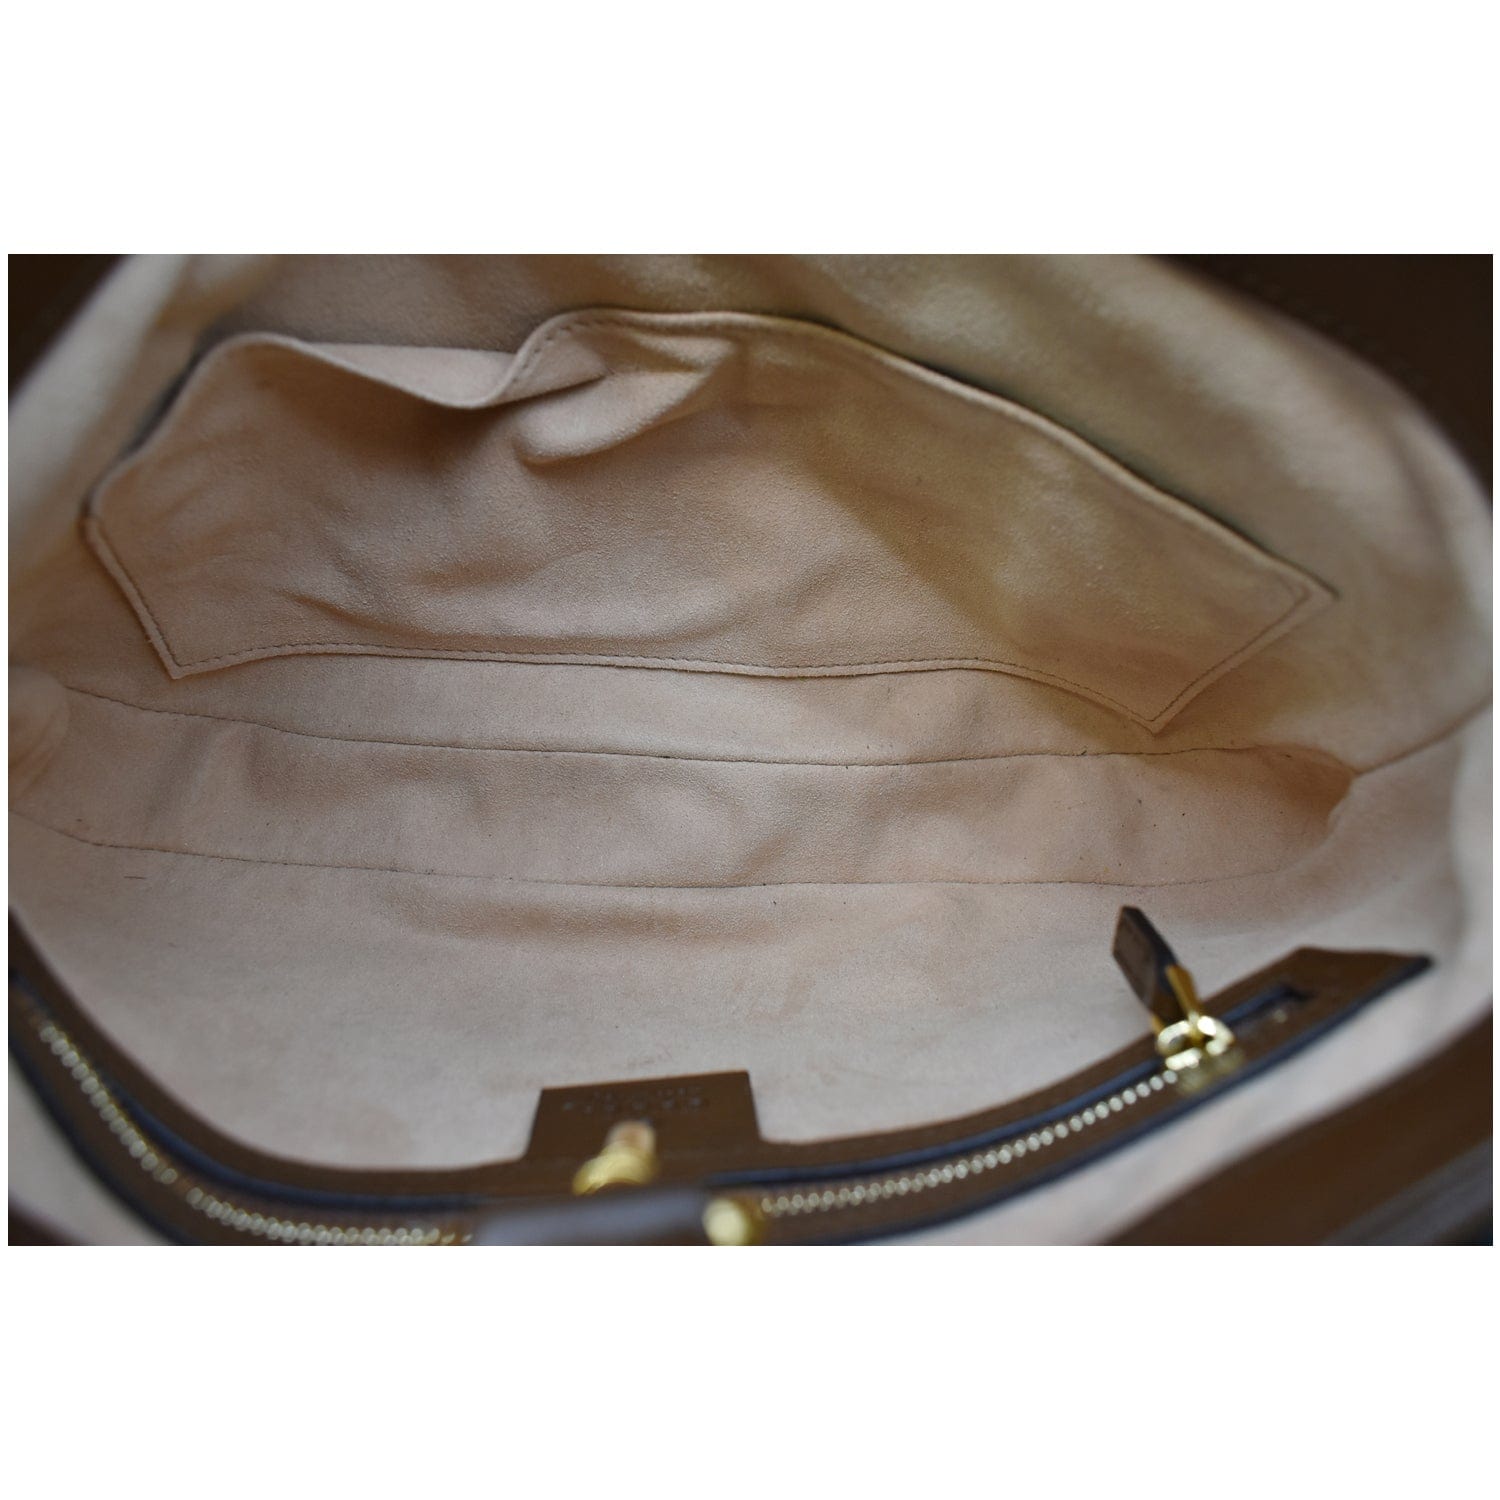 GUCCI Jackie 1961 Small GG Supreme Canvas Leather Hobo Bag Beige 63670